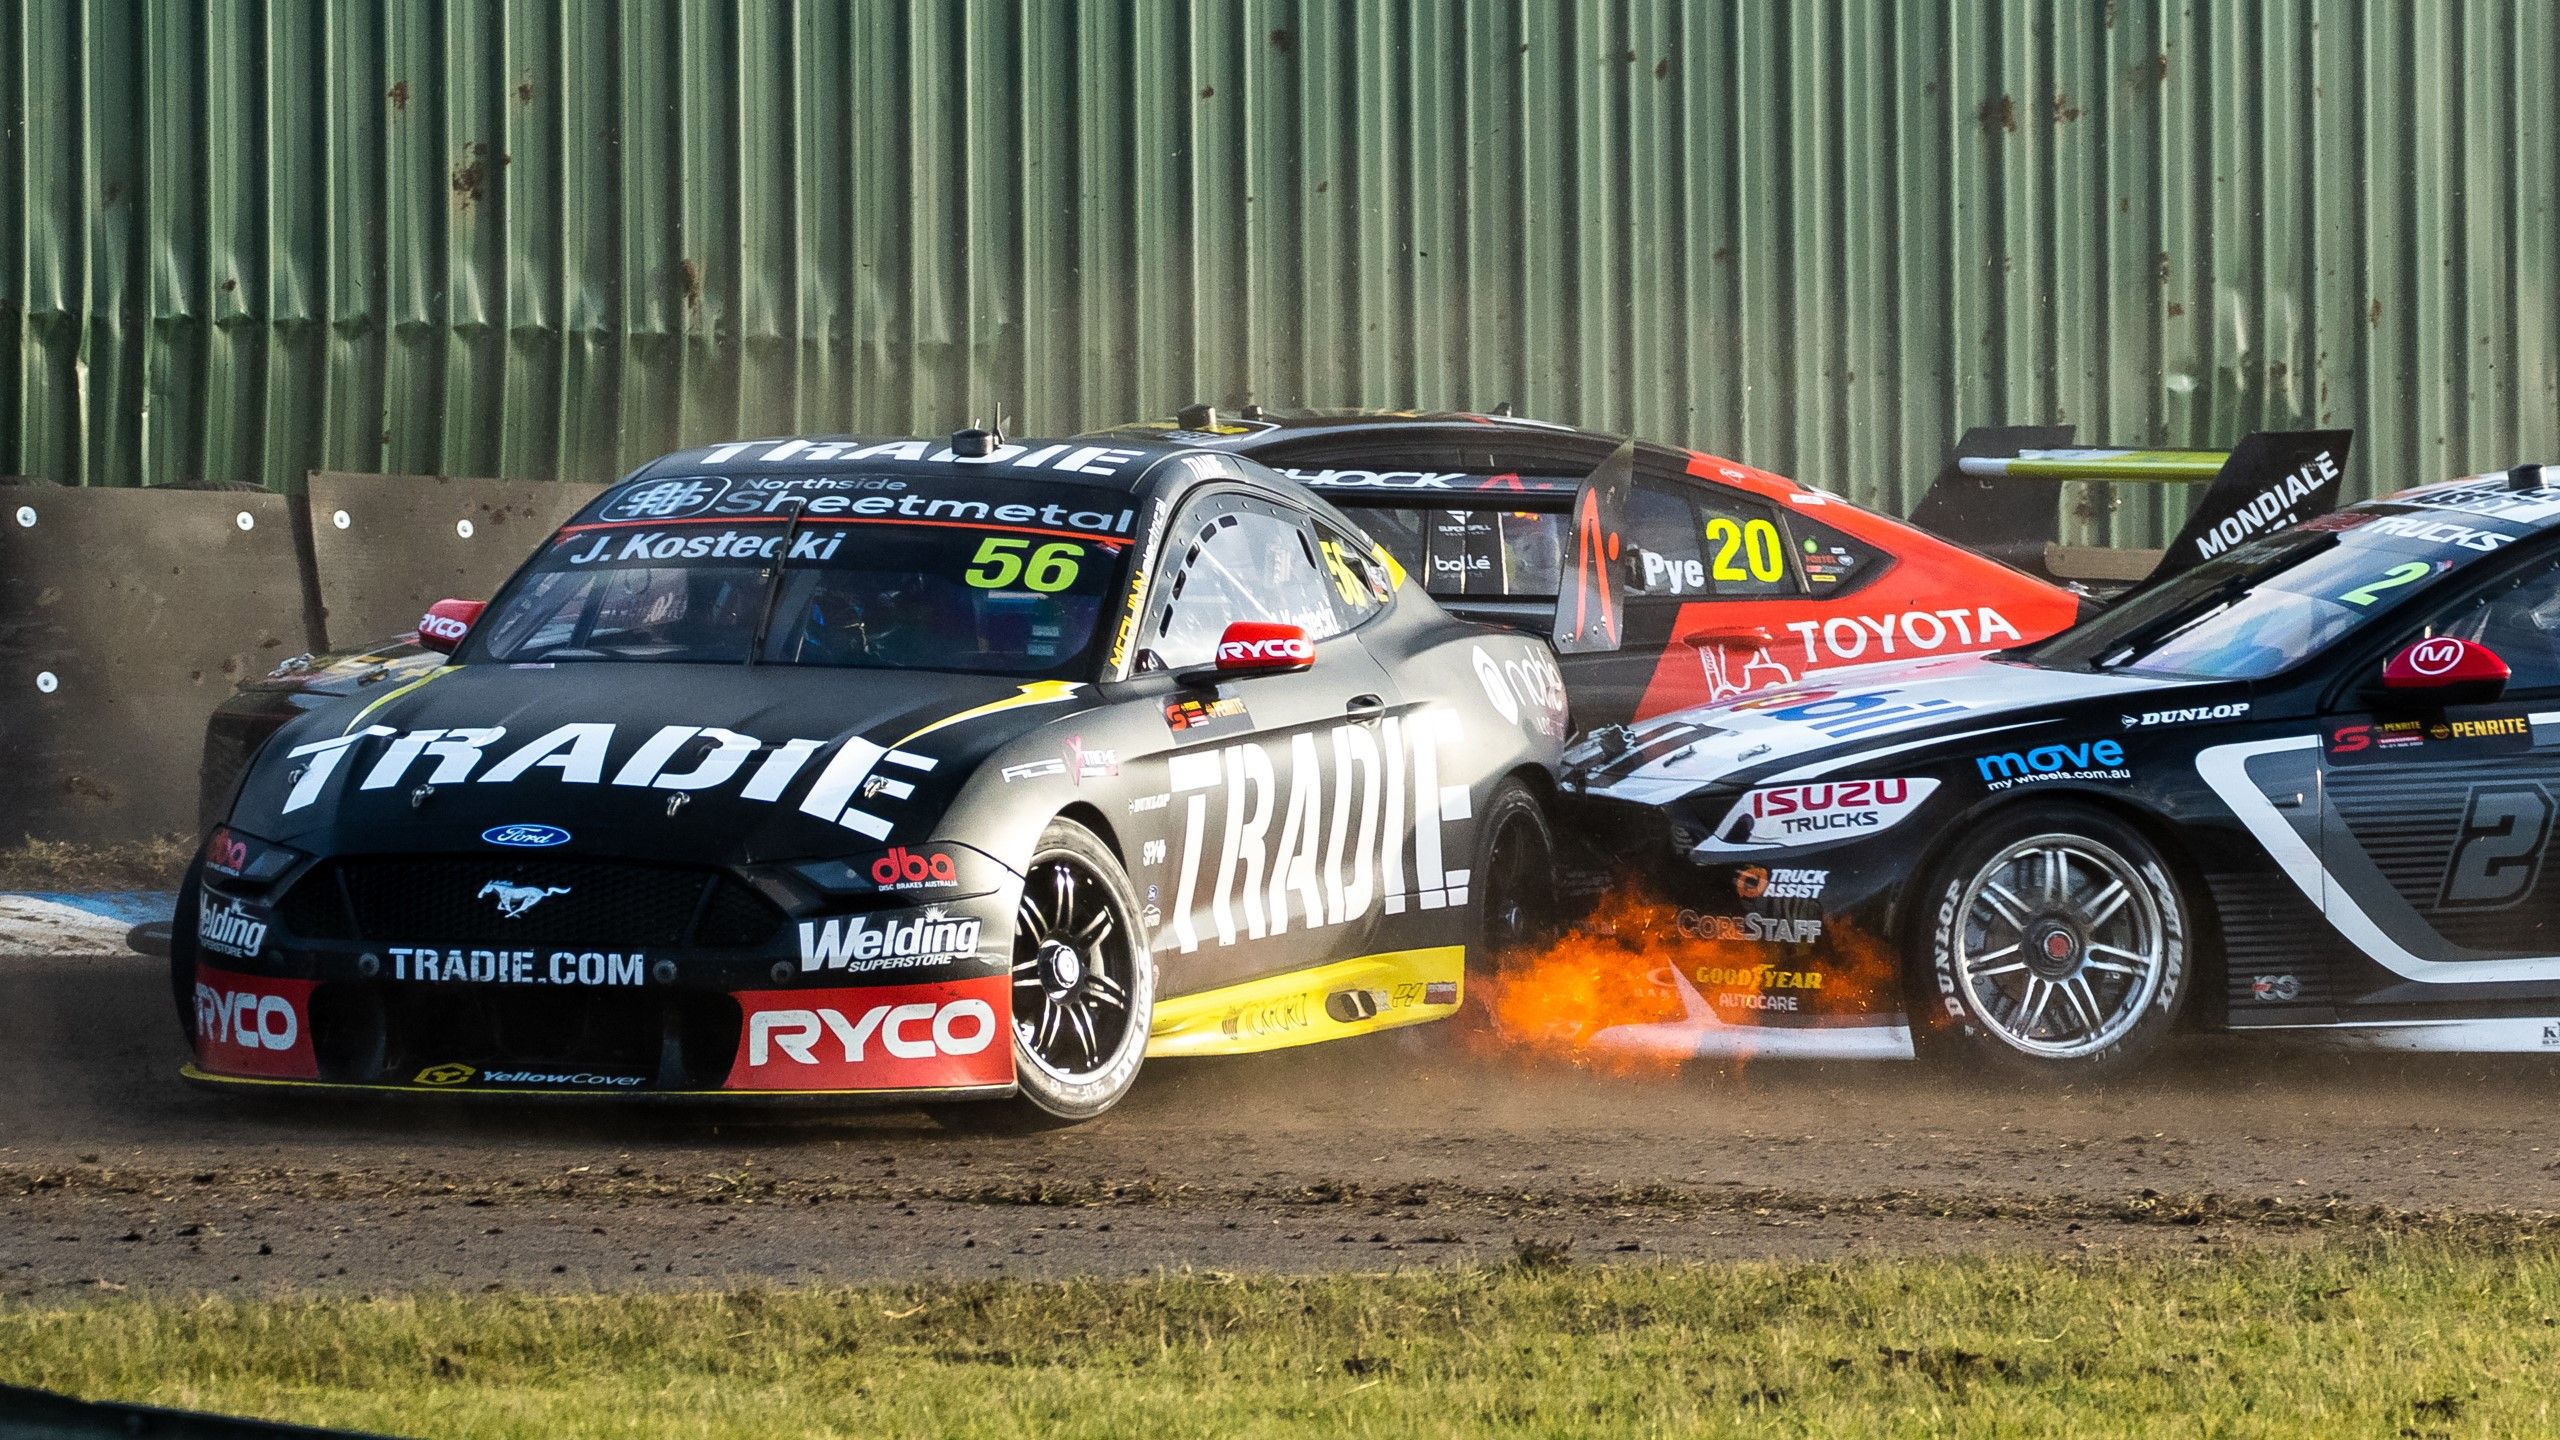 Jake Kostecki (No.56) is turned into a spin by Nick Percat (No.2) at Sandown.